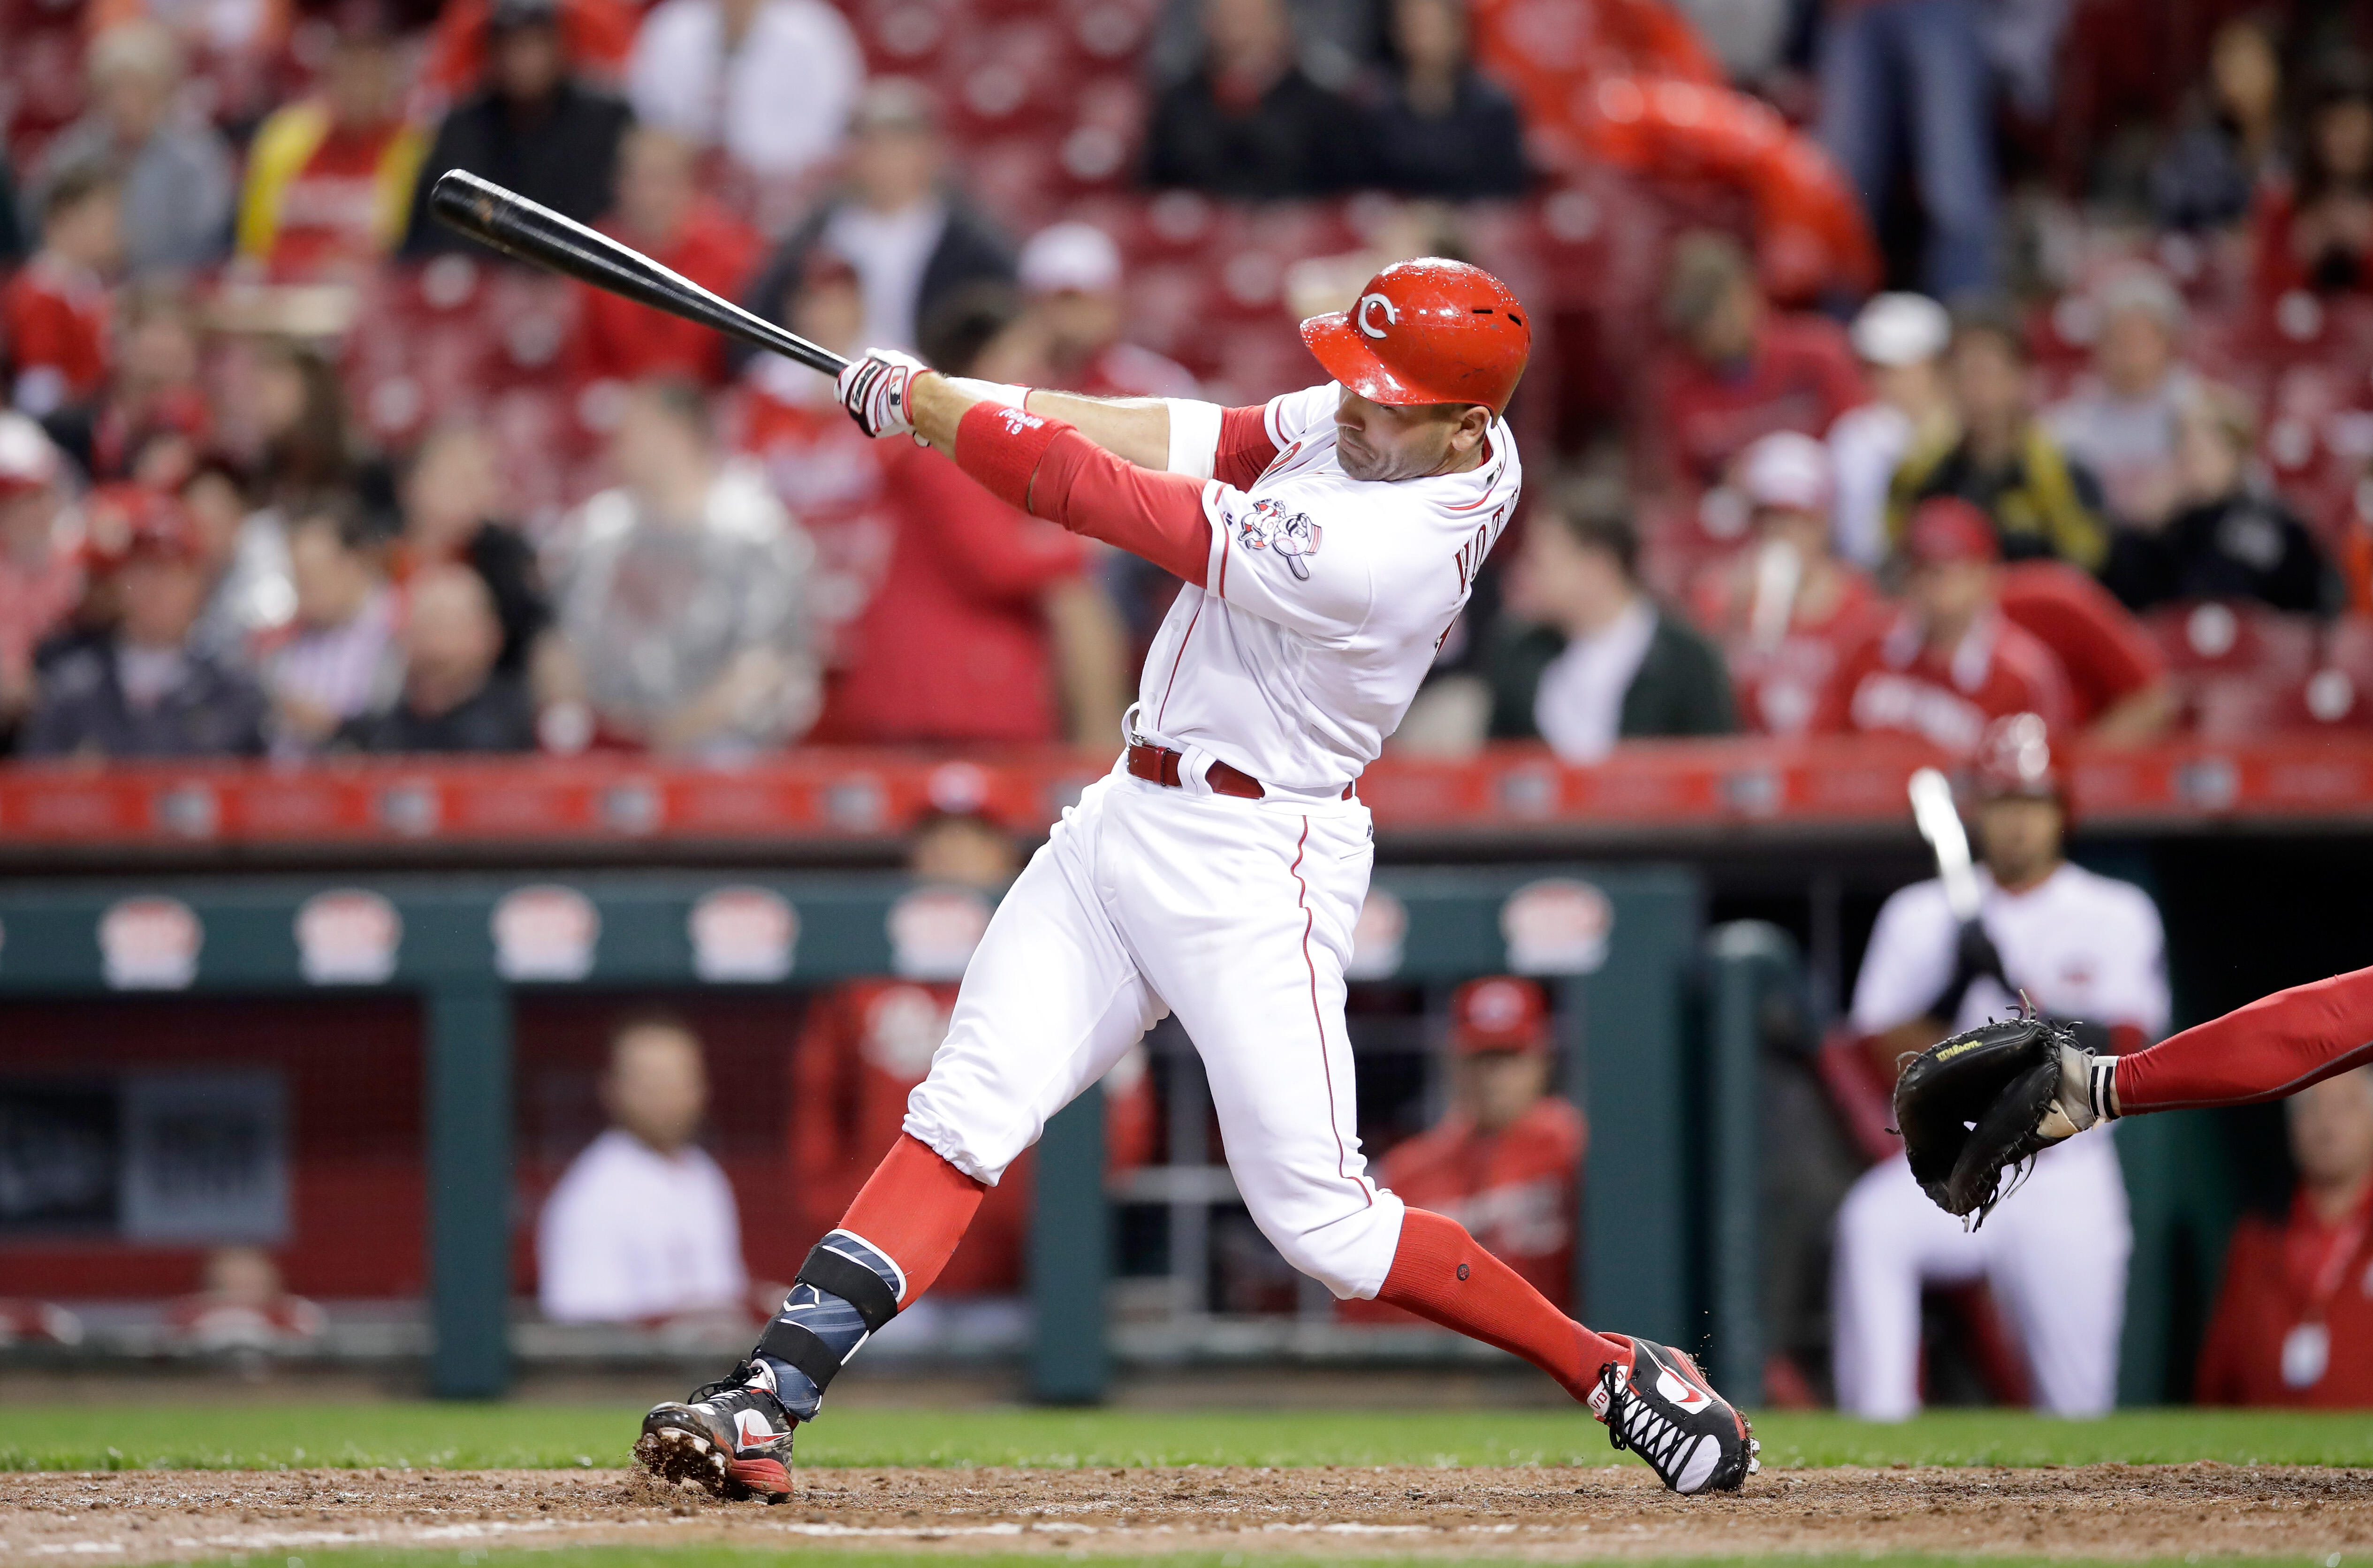 CINCINNATI, OH - APRIL 05:  Joey Votto #19 of the Cincinnati Reds hits a home run in the seventh inning against the Philadelphia Phillies at Great American Ball Park on April 5, 2017 in Cincinnati, Ohio.  (Photo by Andy Lyons/Getty Images)